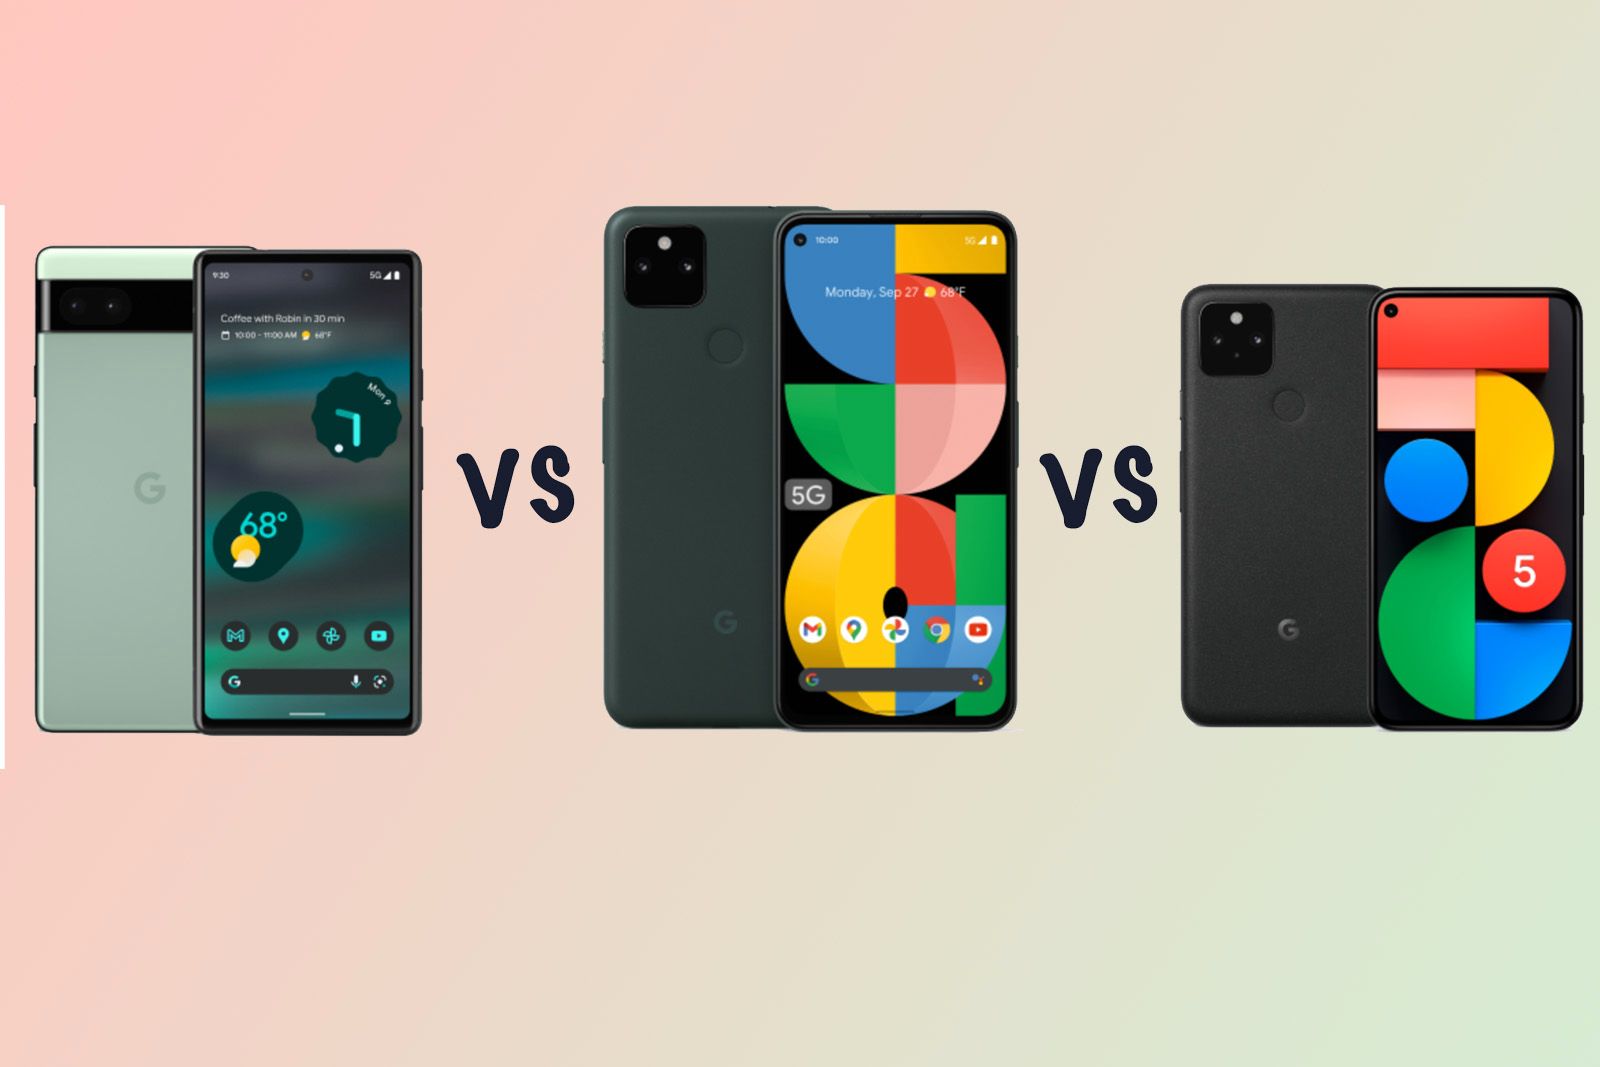 Google Pixel 6a vs Pixel 5a vs Pixel 5: What's the difference? photo 1